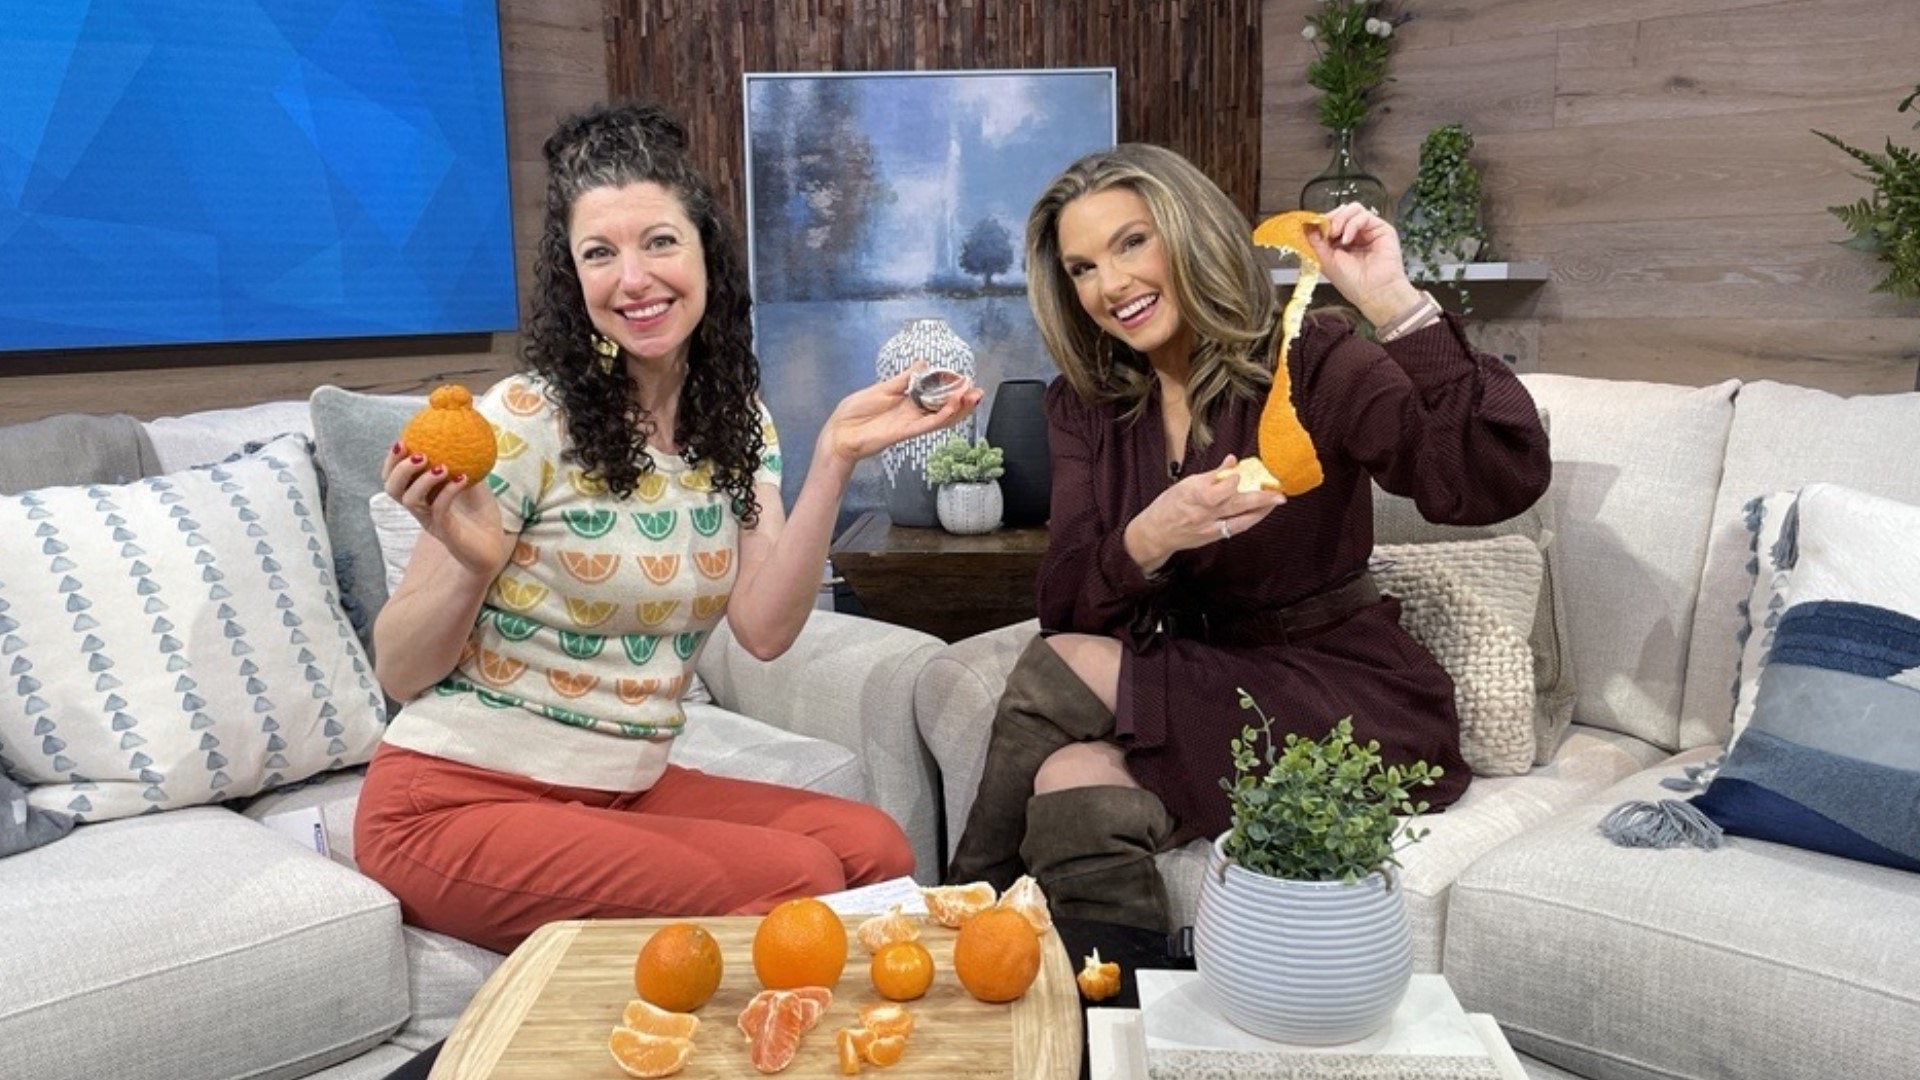 Podcaster Rachel Belle joined New Day to chat about her show and share her love of citrus. #newdaynw